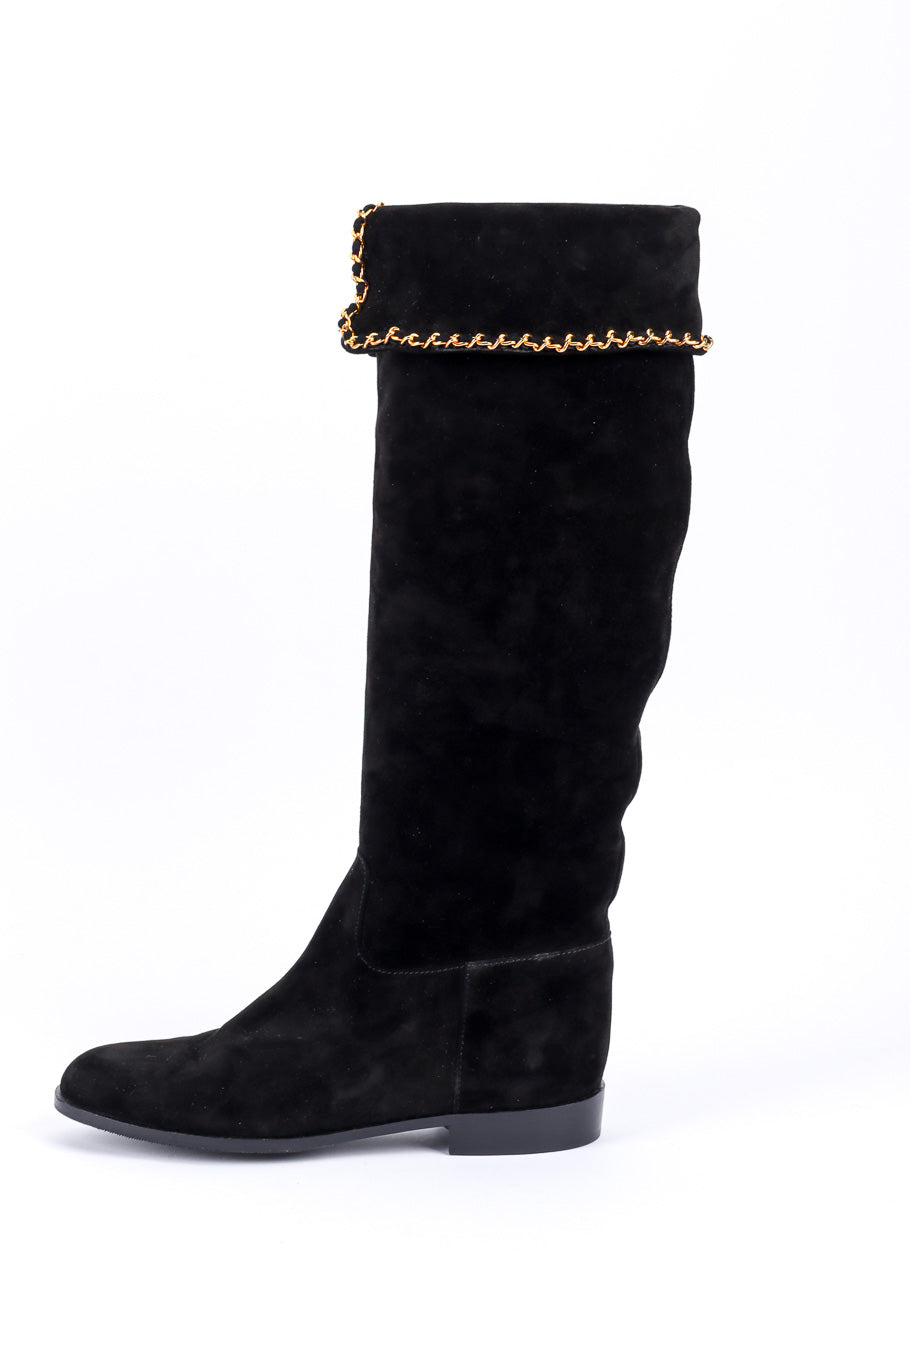 Vintage Chanel Chainlink and Suede Riding Boots side view @recessla